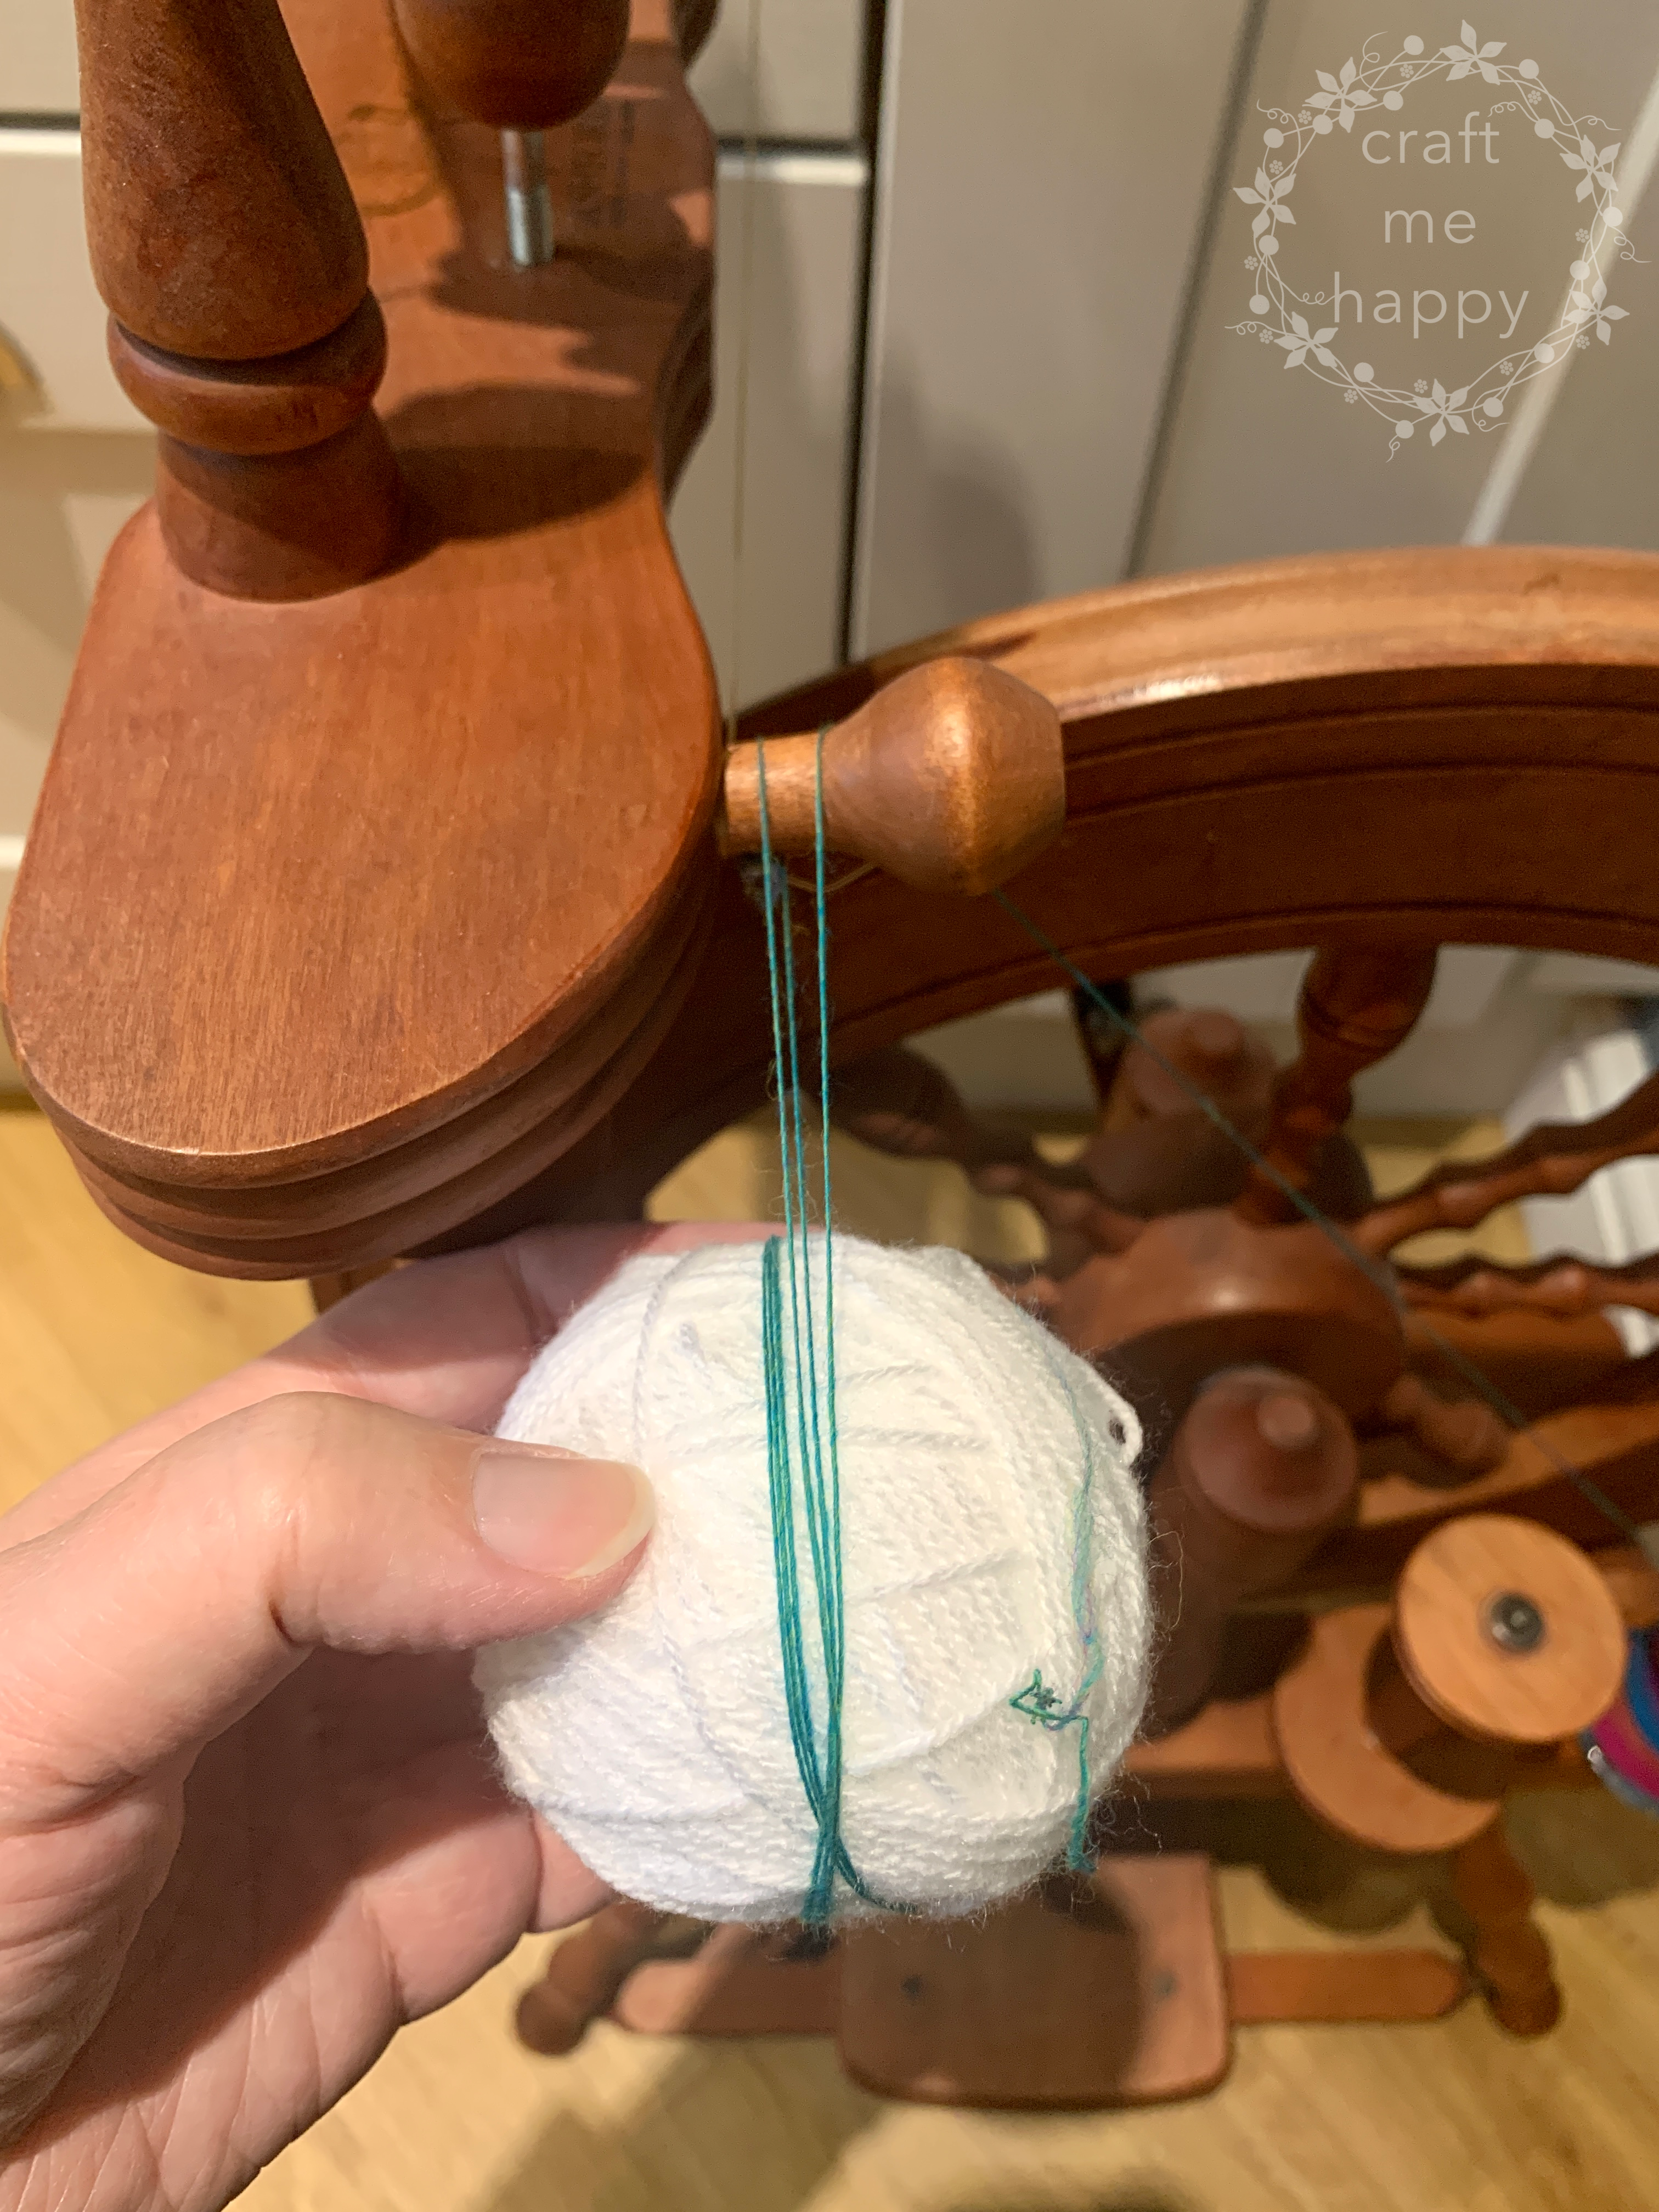 Spinning some hand-dyed wool into yarn using a wooden spinning wheel #